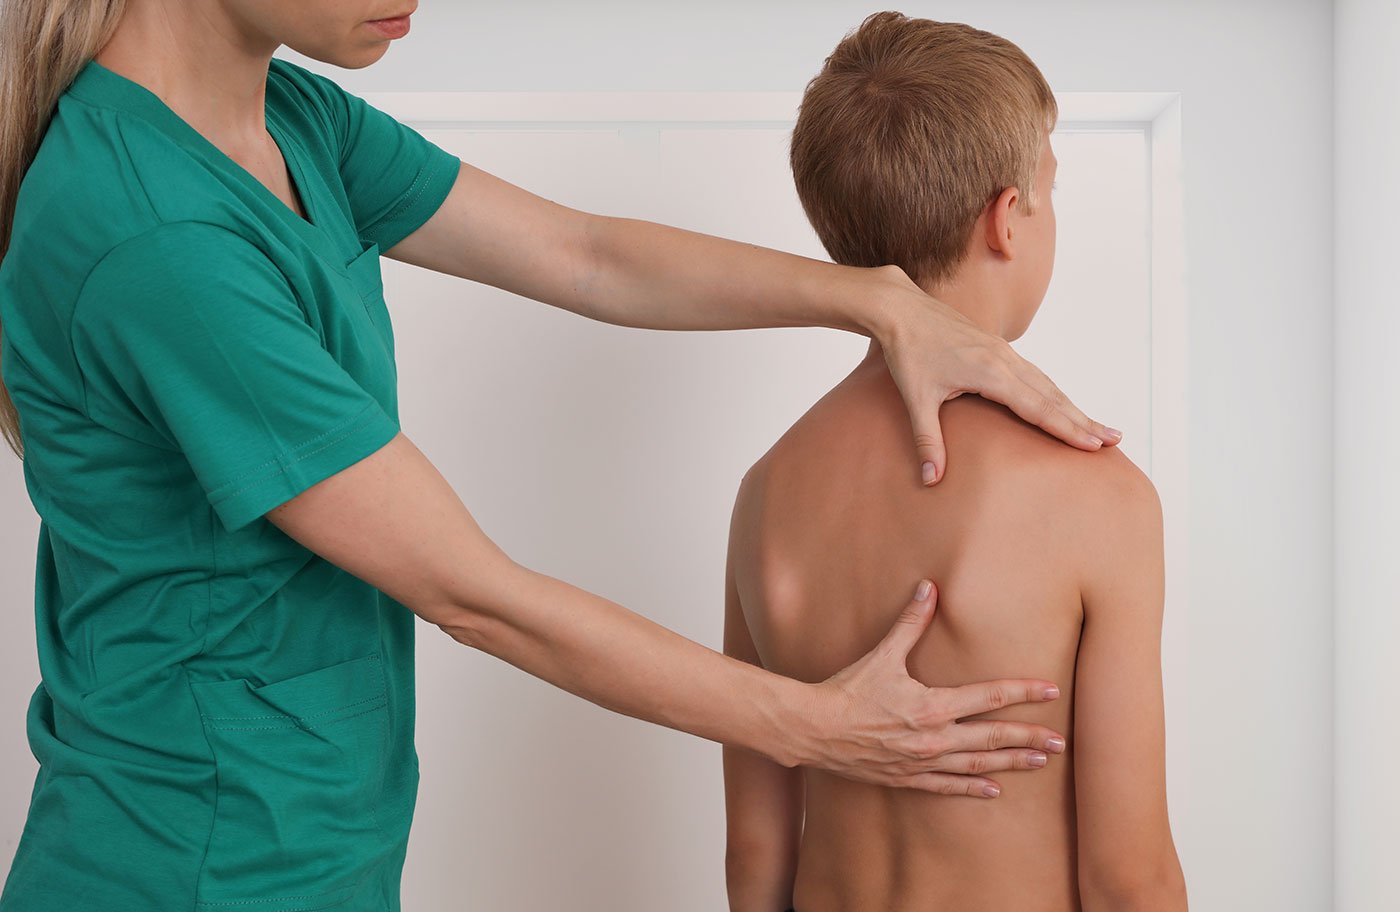 Benefits of working with a chiropractor